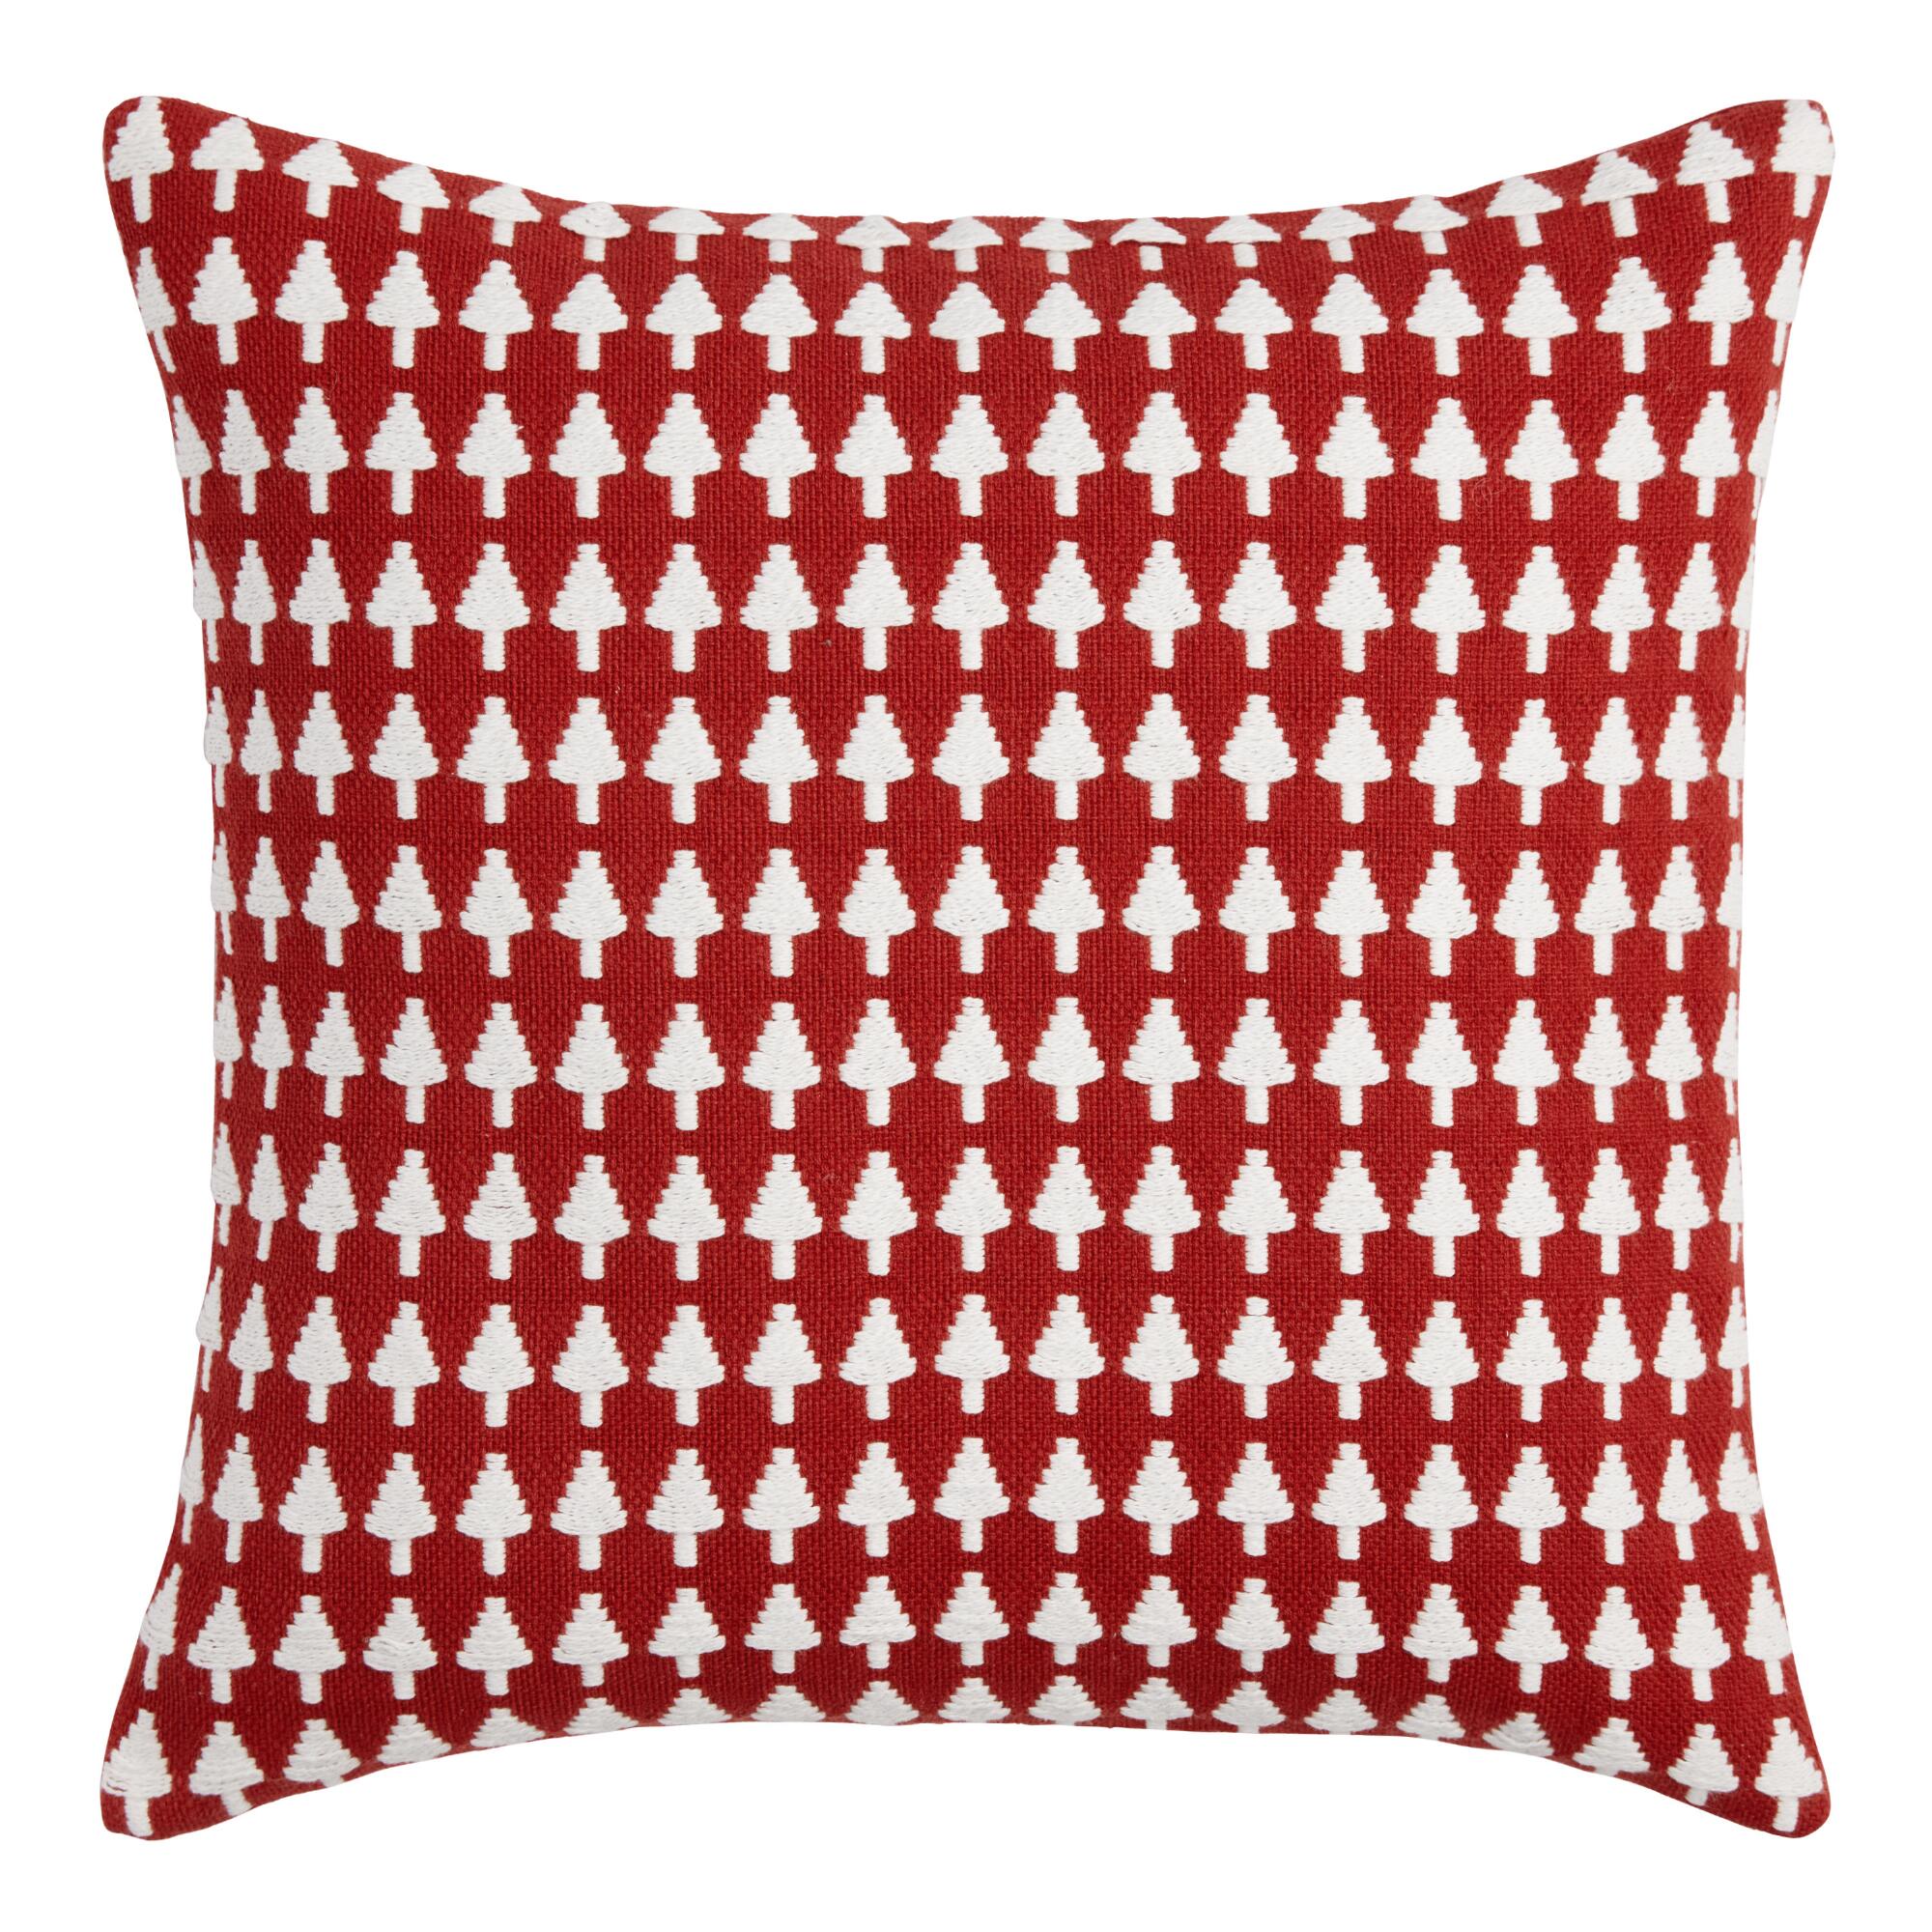 Pier Place Red and White Trees Throw Pillow: Red/White - Cotton - 18" Square by World Market